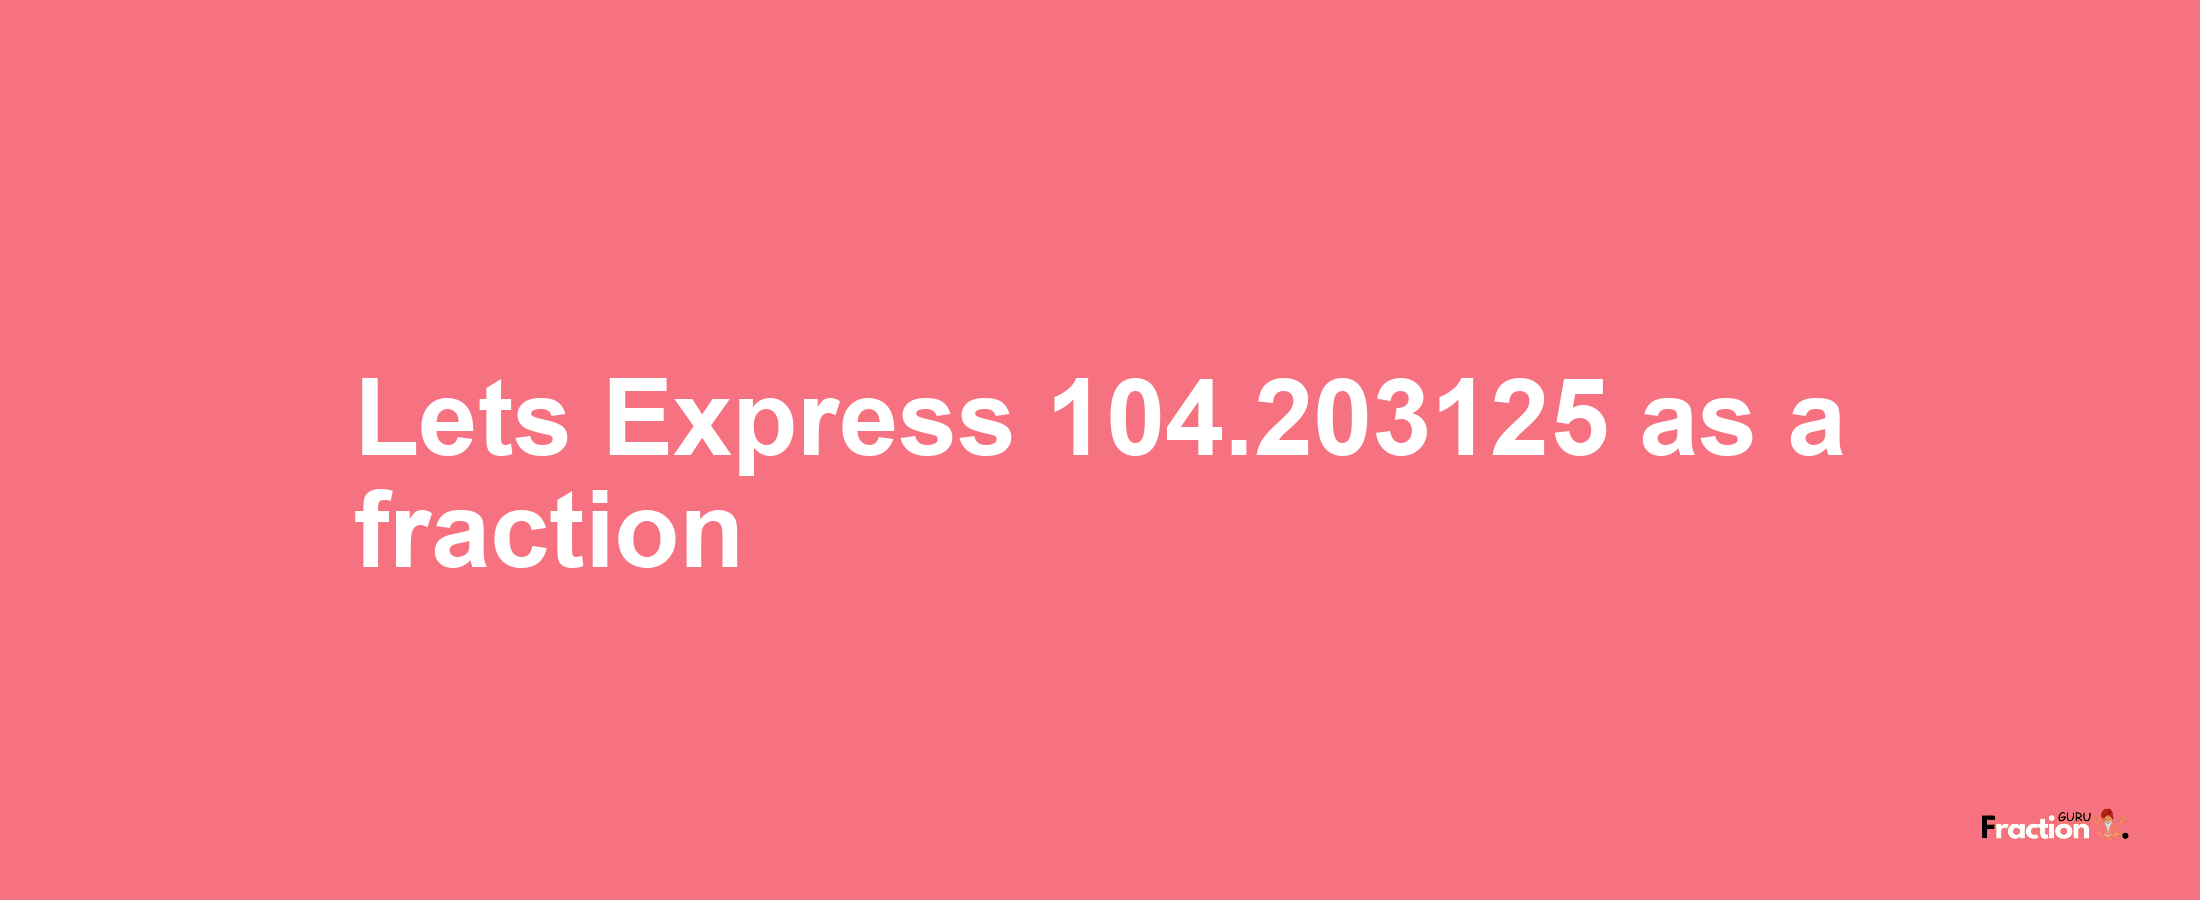 Lets Express 104.203125 as afraction